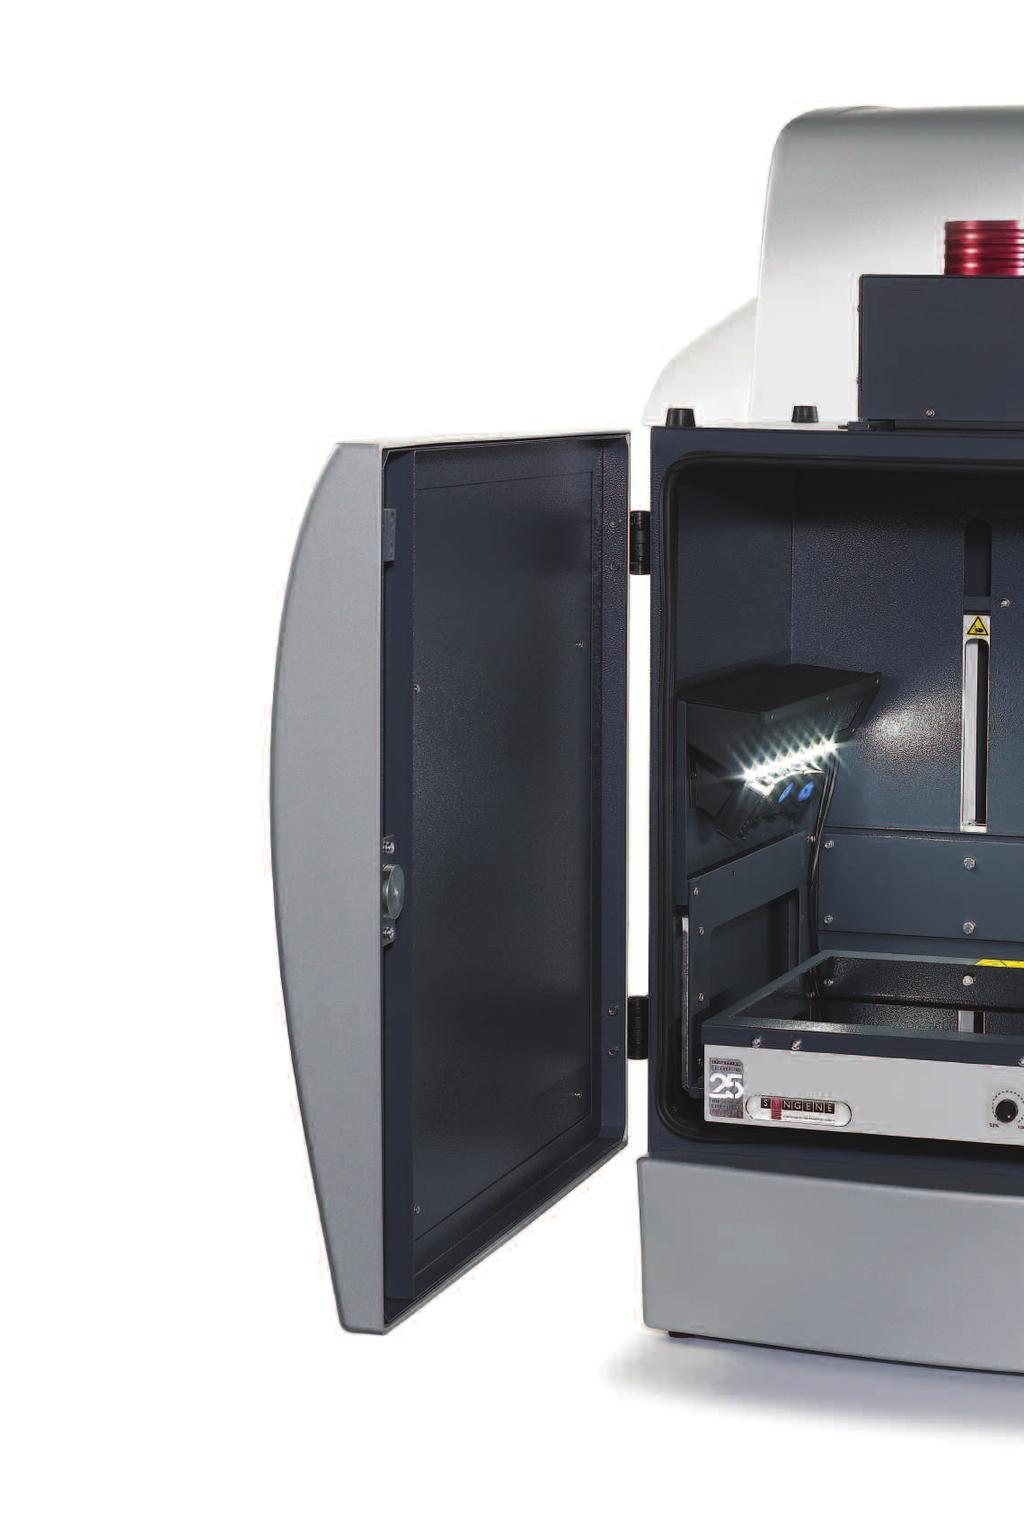 GEL IMAGING AND ANALYSIS Automated imaging for all your applications Syngene imaging systems are recognised world-wide as high quality, high performance instruments for the capture and analysis of